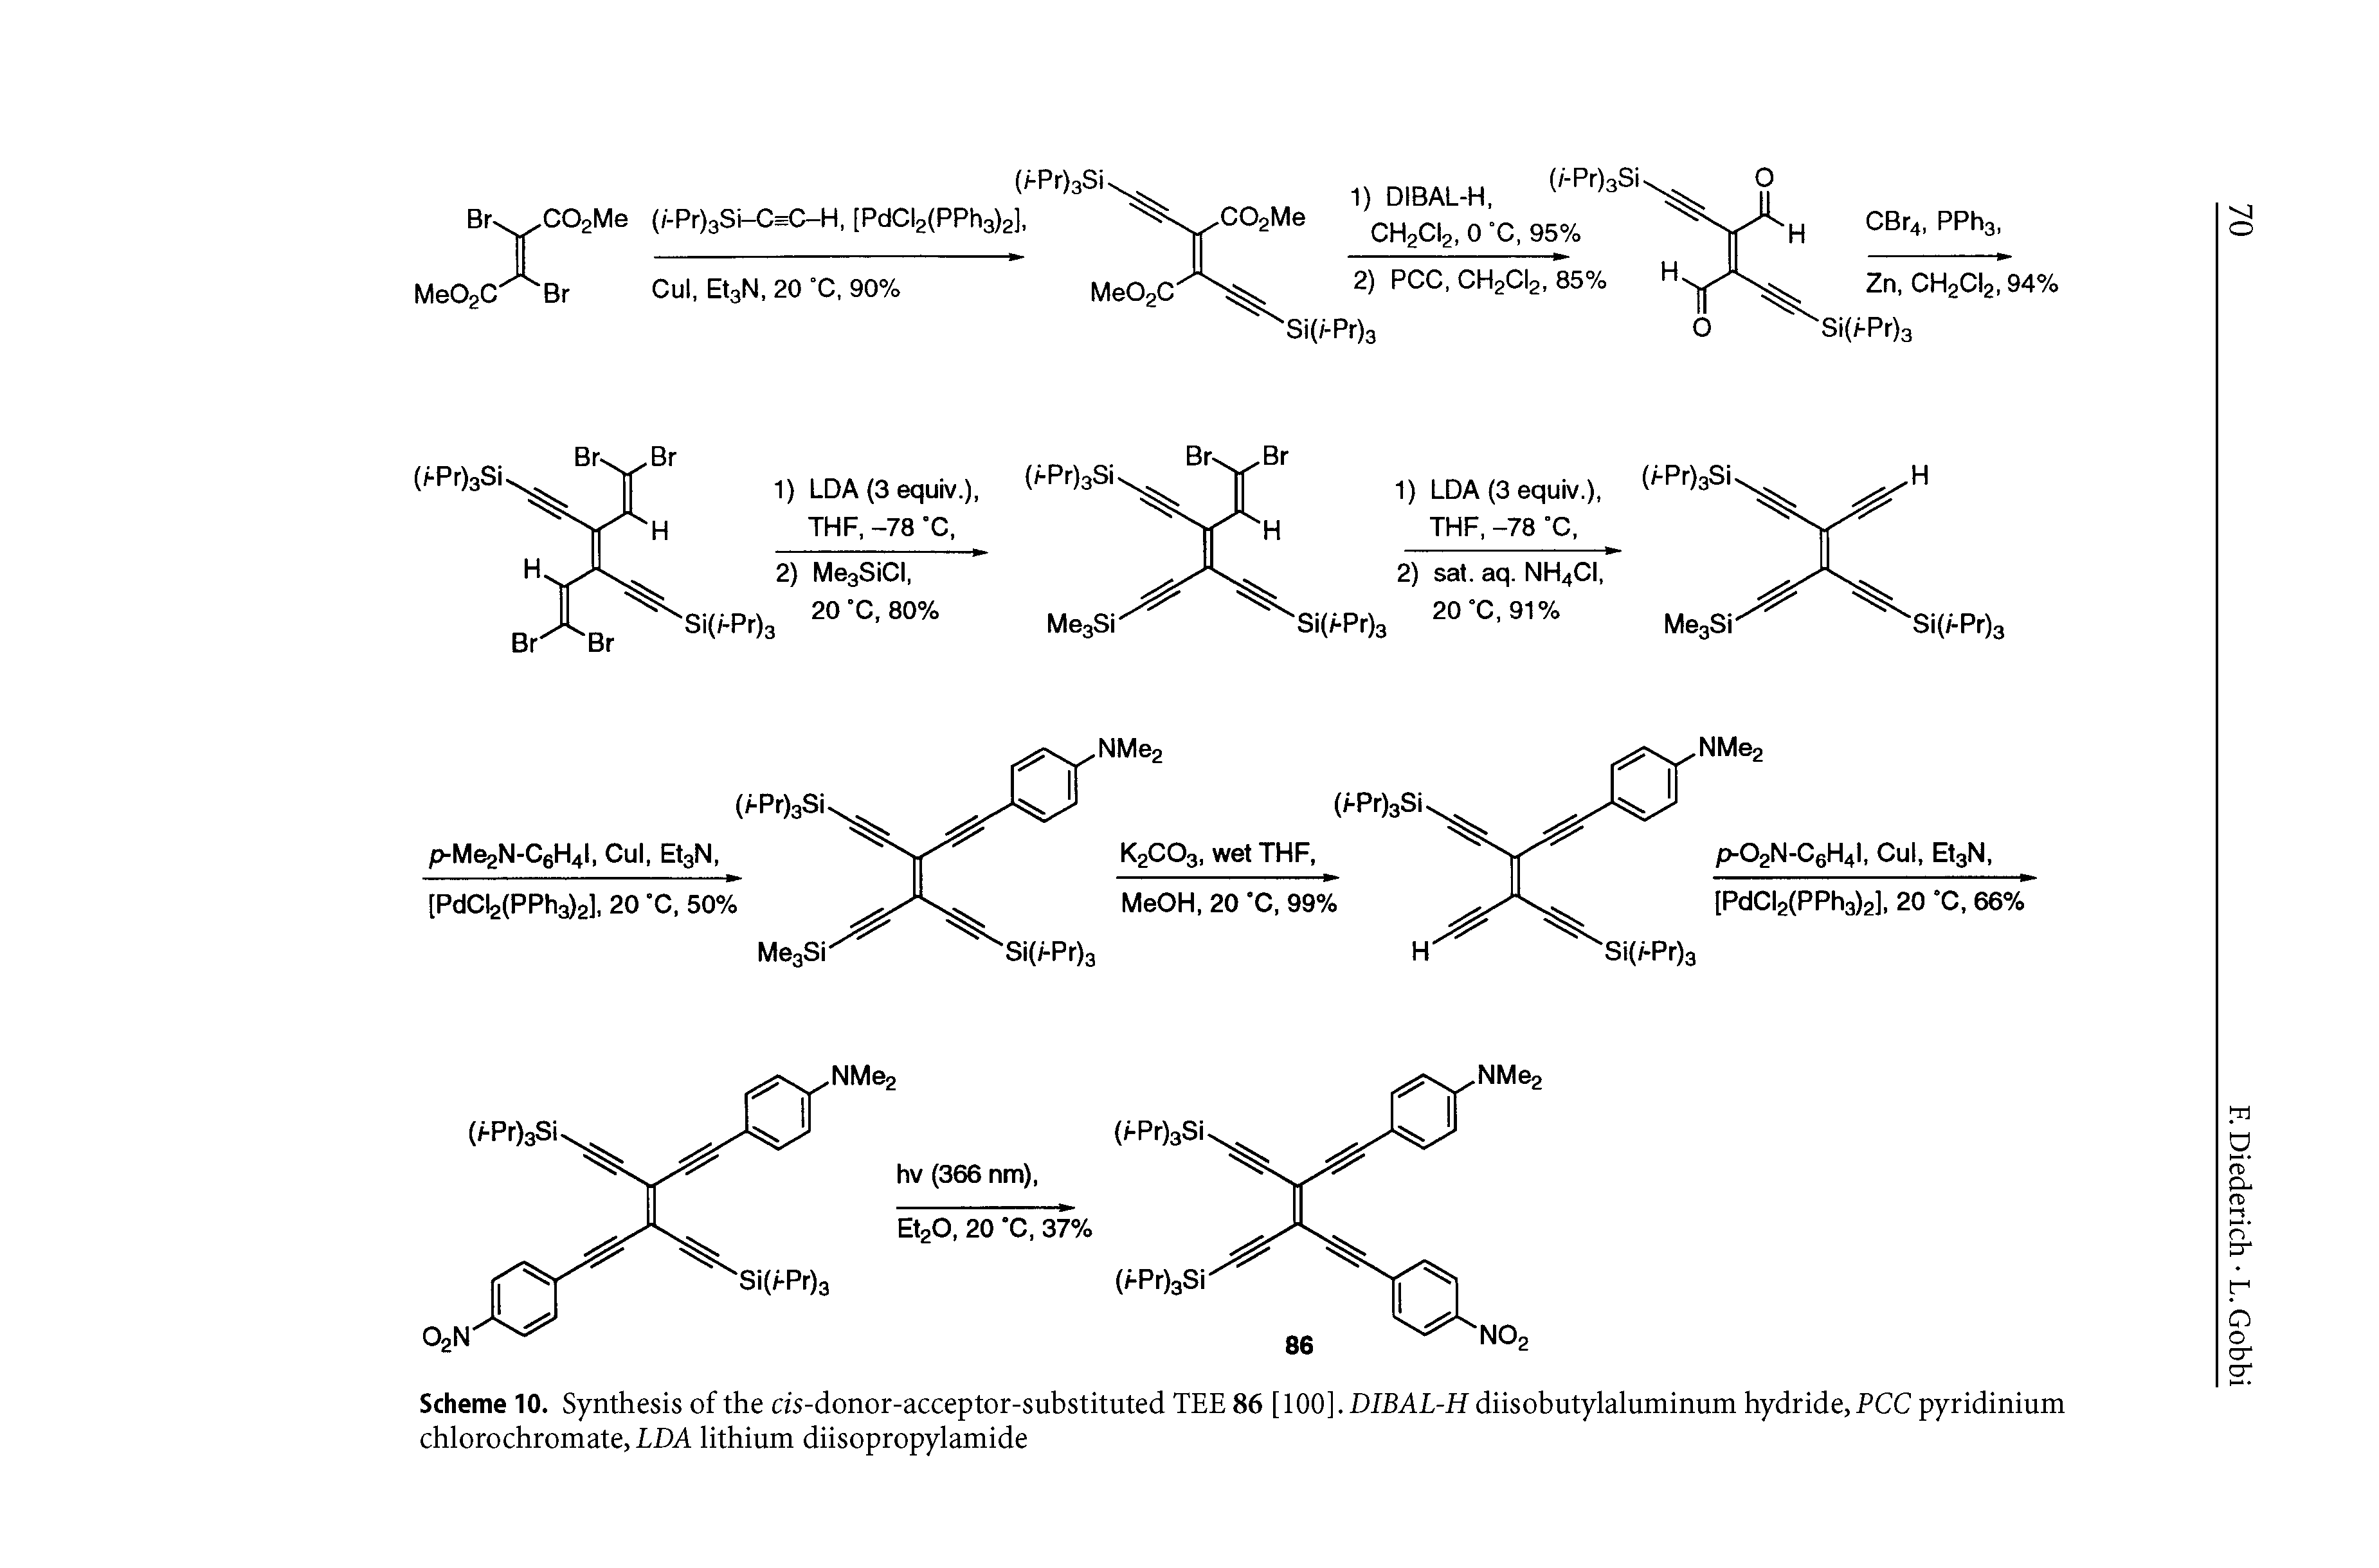 Scheme 10. Synthesis of the ds-donor-acceptor-substituted TEE 86 [ 100]. DIBAL-H diisobutylaluminum hydride, PCC pyridinium chlorochromate, LDA lithium diisopropylamide...